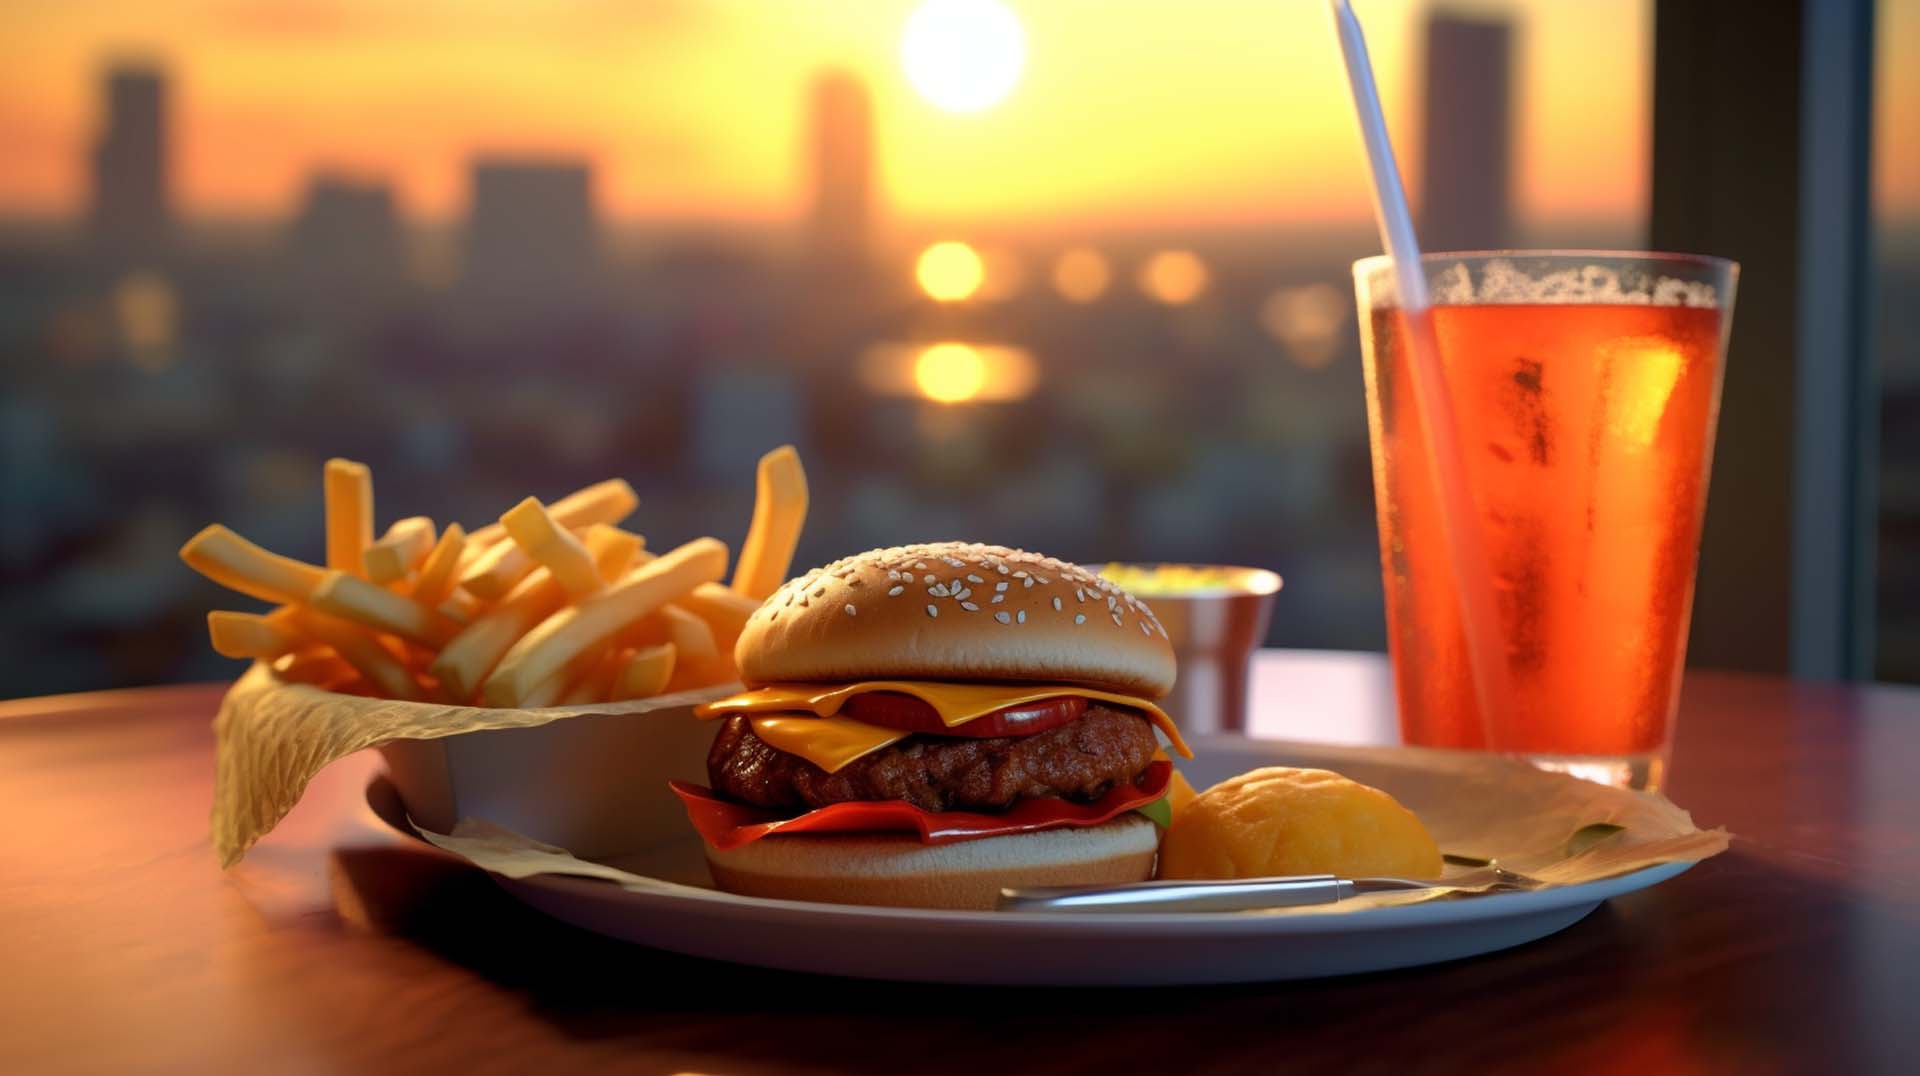 Camarillo has a wide variety of delicious fast food options to choose from.